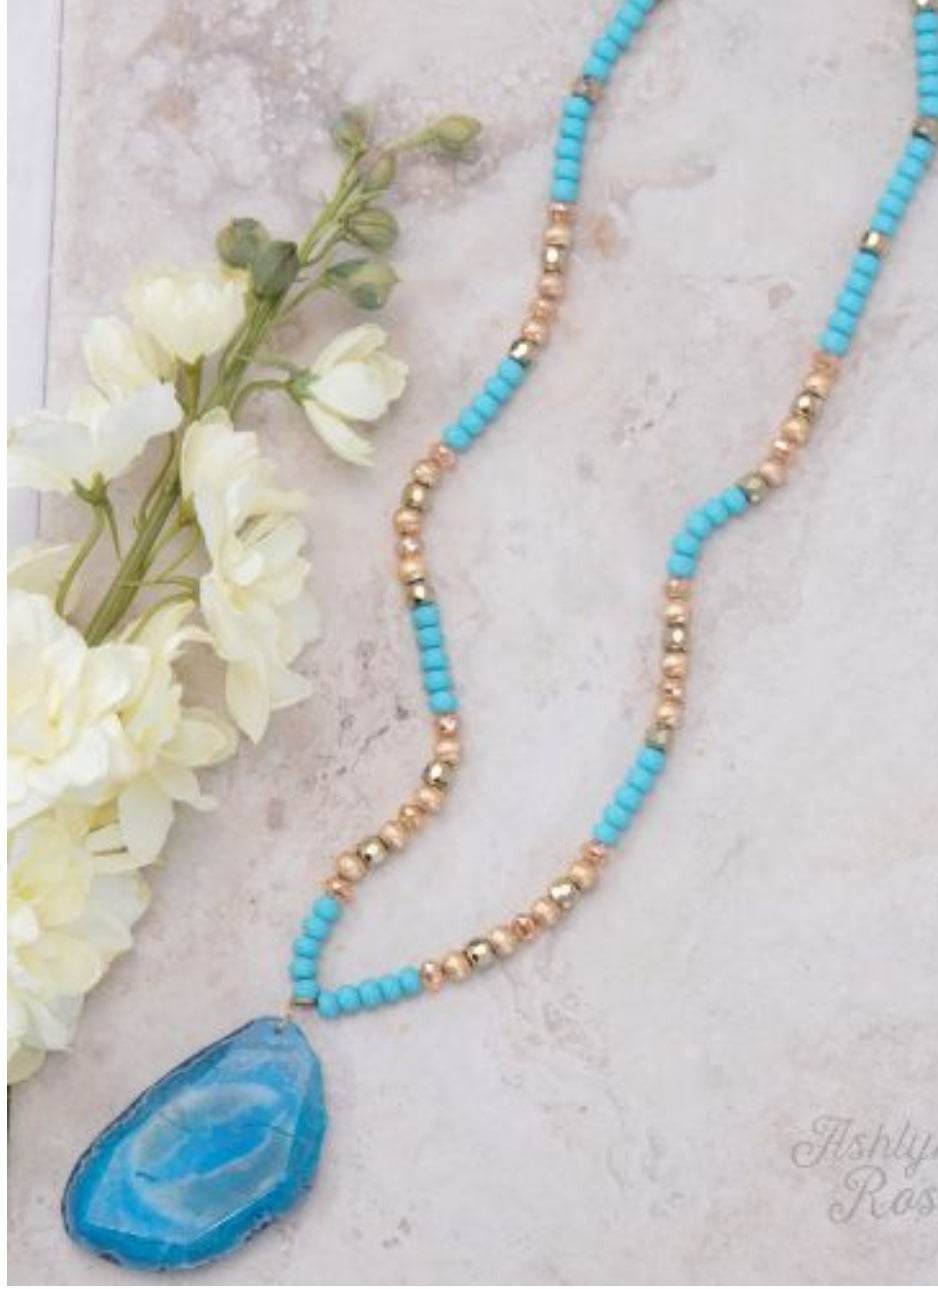 Turquoise

Necklace